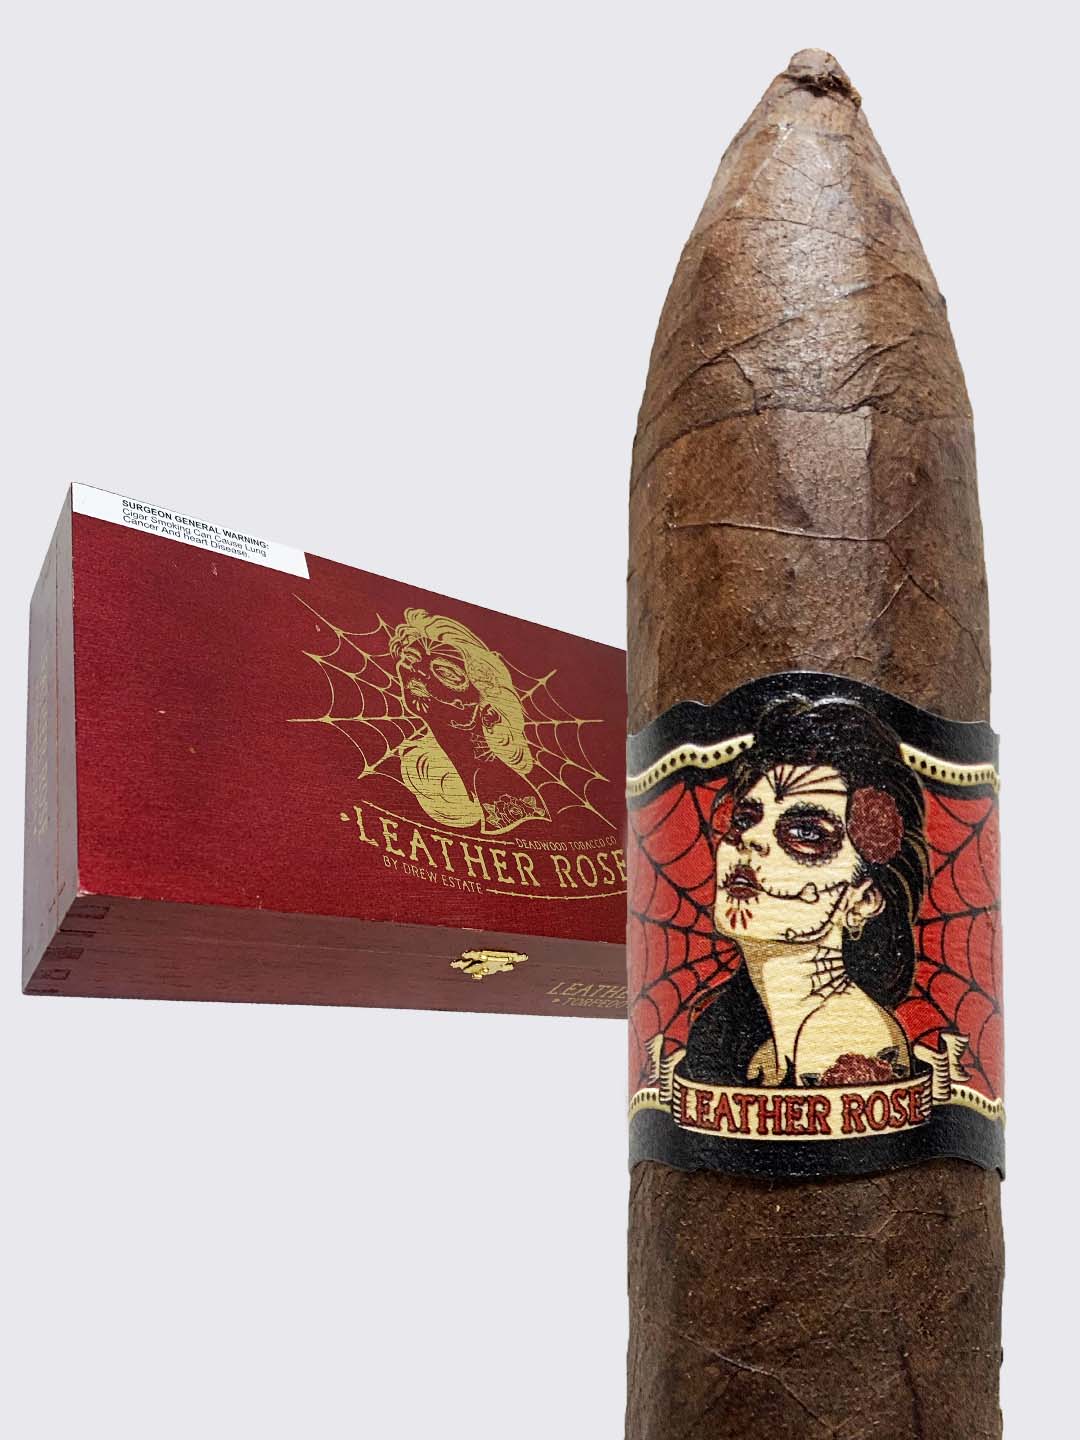 Deadwood Leather Rose Cigars